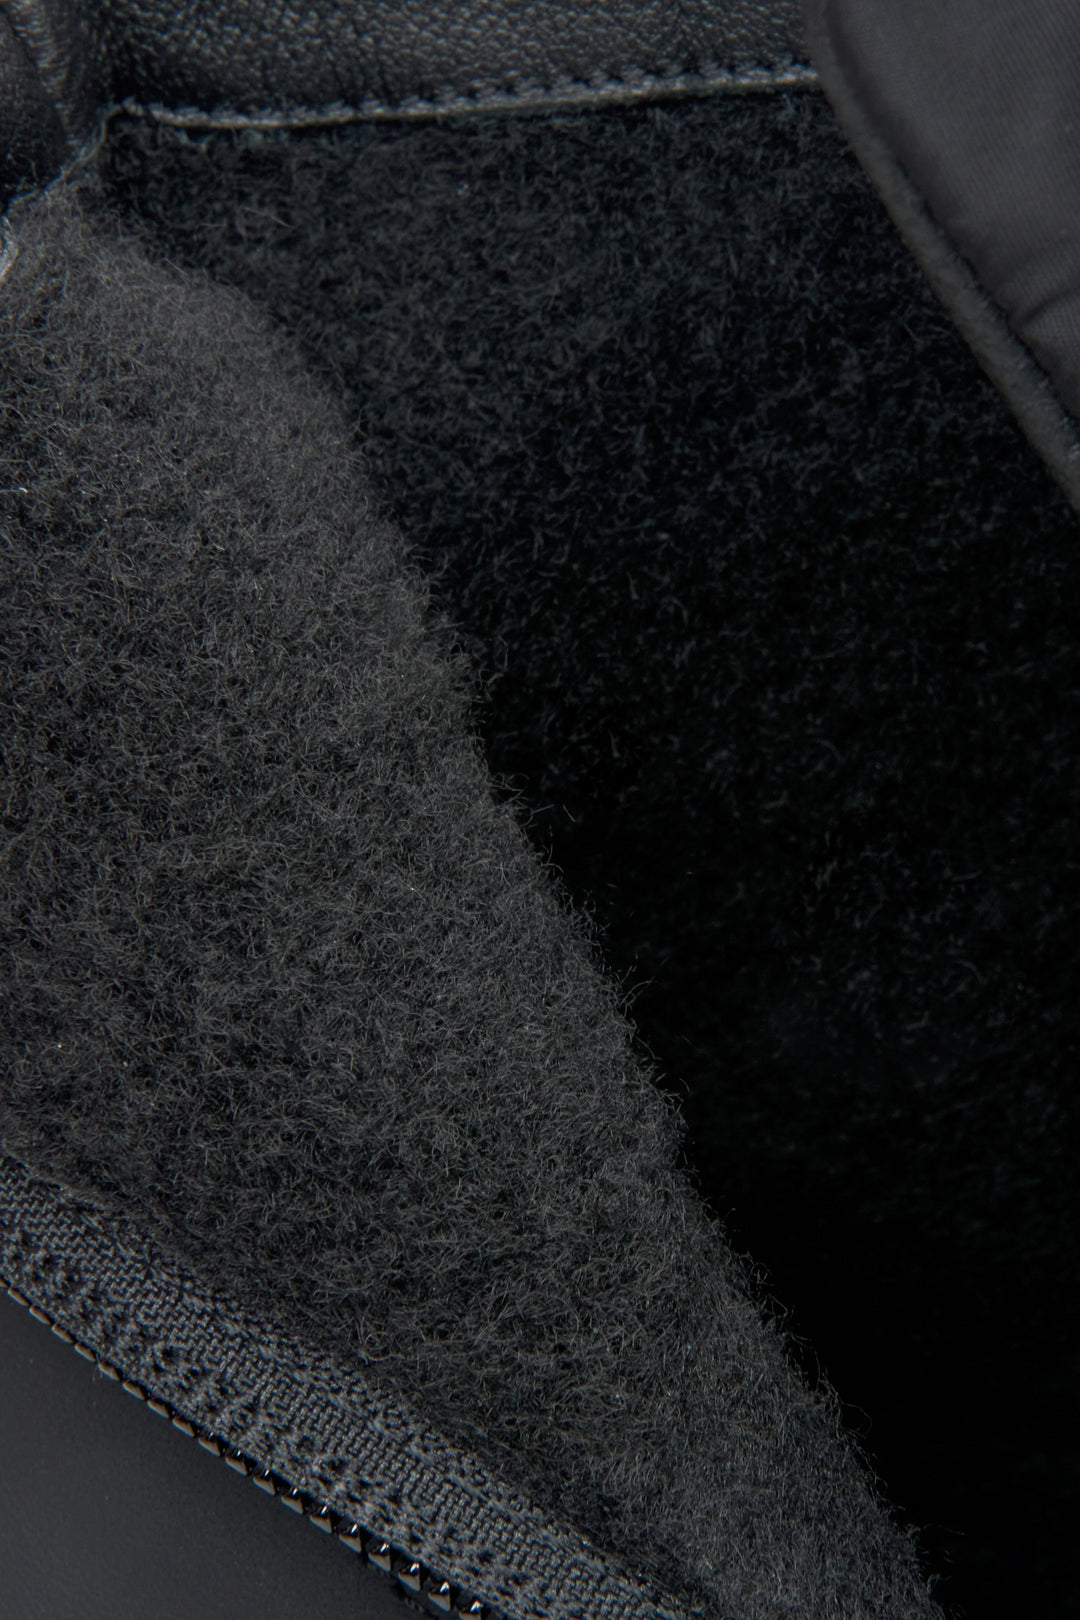 Men's black Estro autumn boots - close-up on the inside of the boot.